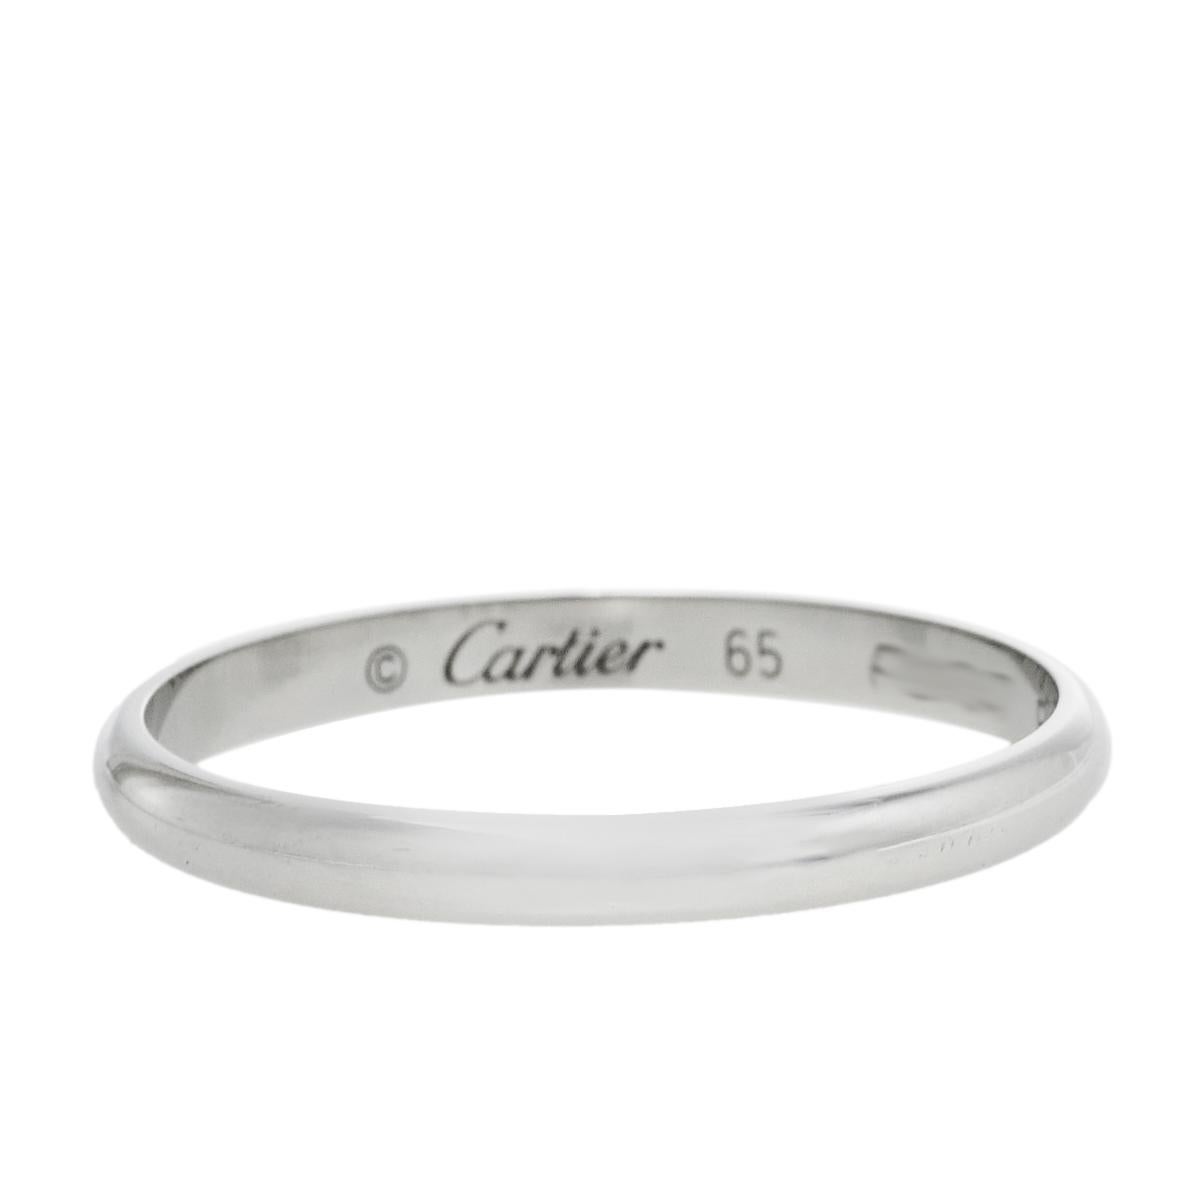 This '1895 Wedding' ring from Cartier is that versatile piece of jewelry that you can easily wear every day. It features a platinum body that can be stacked with other rings or used as an individual piece. We love the simplicity and elegance that